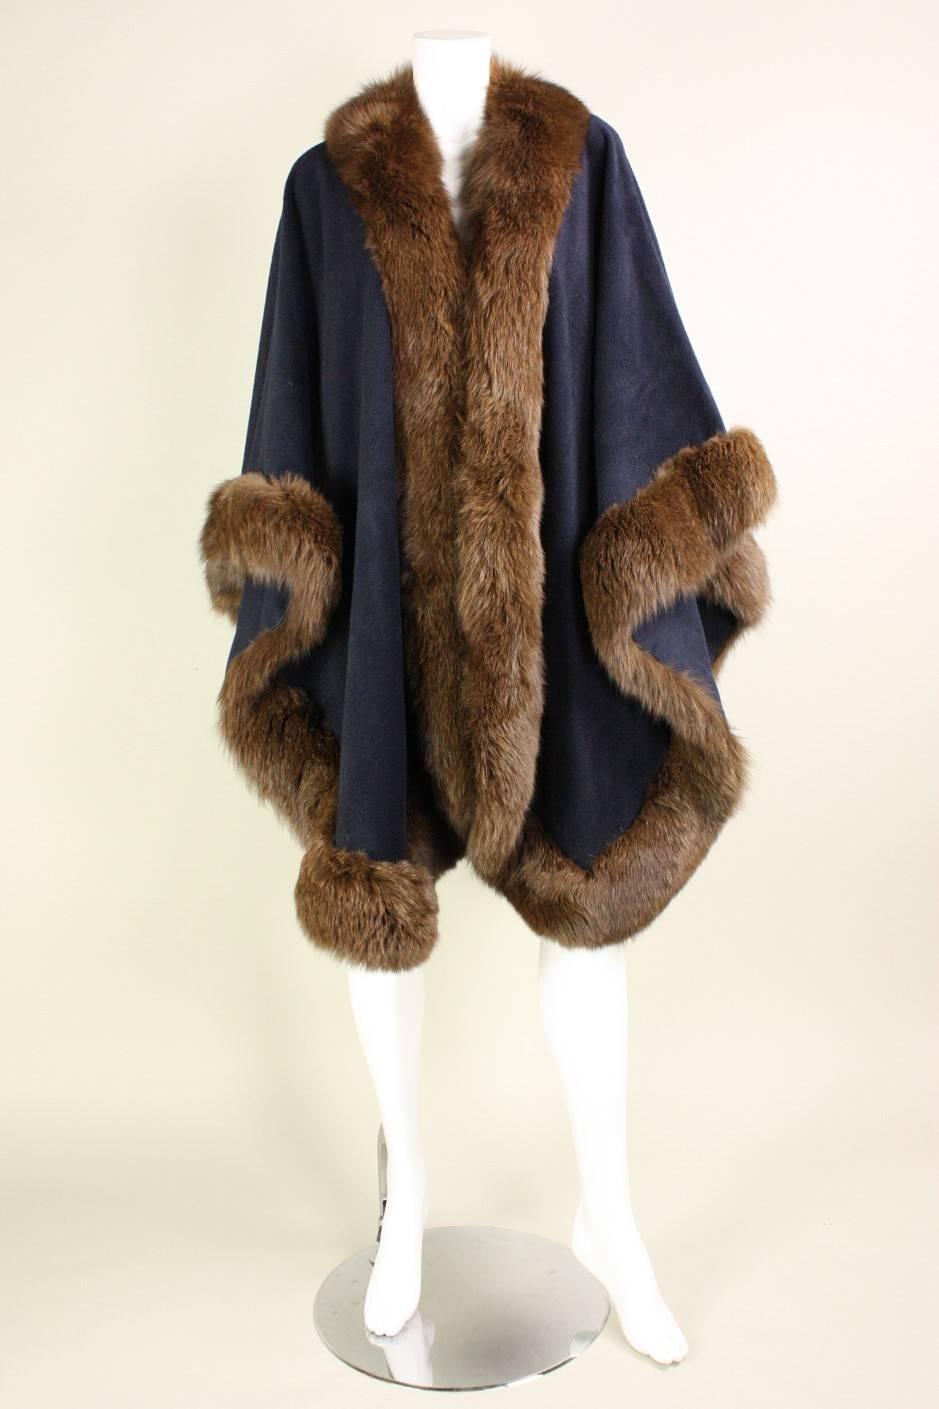 Vintage cape from Bergdorf Goodman is made of soft navy medium-weight wool with luxurious fur trim along all edges.  No closures.  Unlined. 

Free size.

Center Back Length: 39"